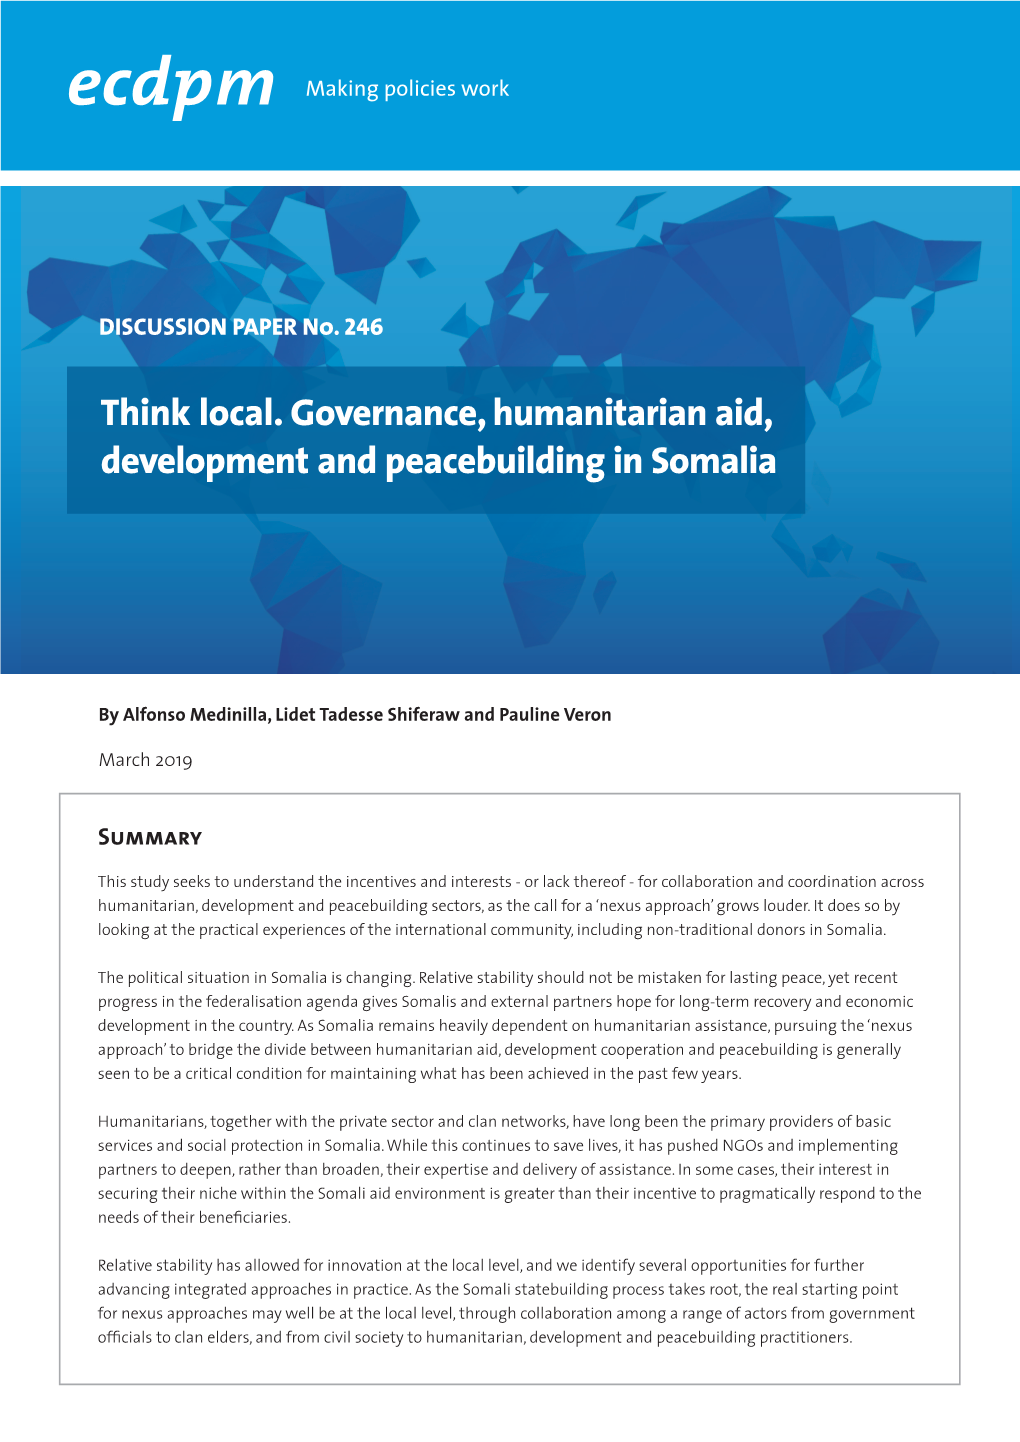 Think Local. Governance, Humanitarian Aid, Development and Peacebuilding in Somalia